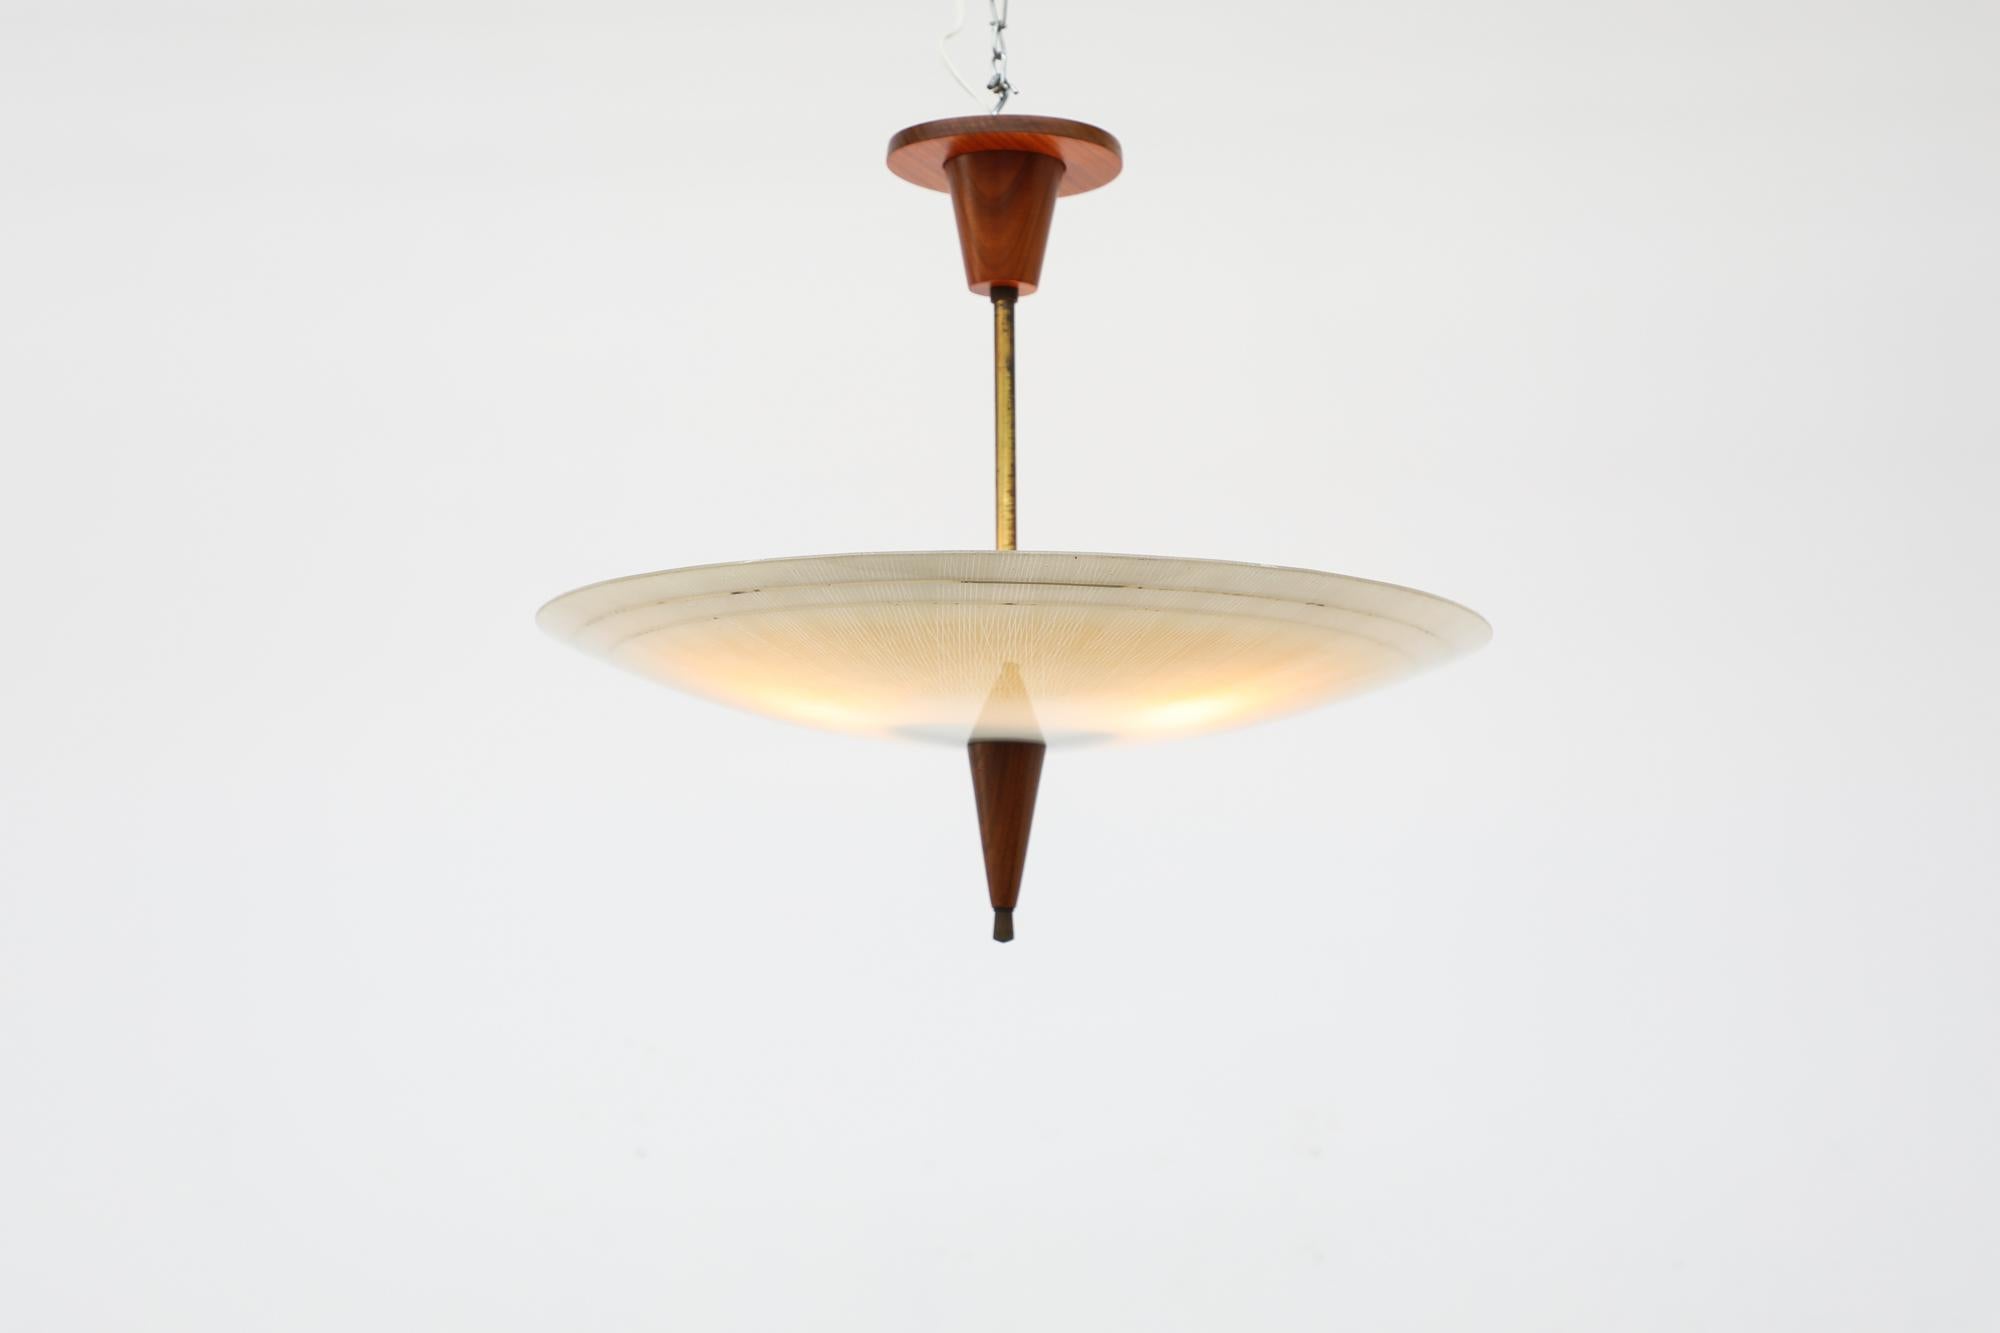 Beautiful 1950's Rondelle ceiling pendant with patterned glass and gold accented shade. The light features brass and teak details, including teak canopy. In original condition with visible wear consistent with its age and use.